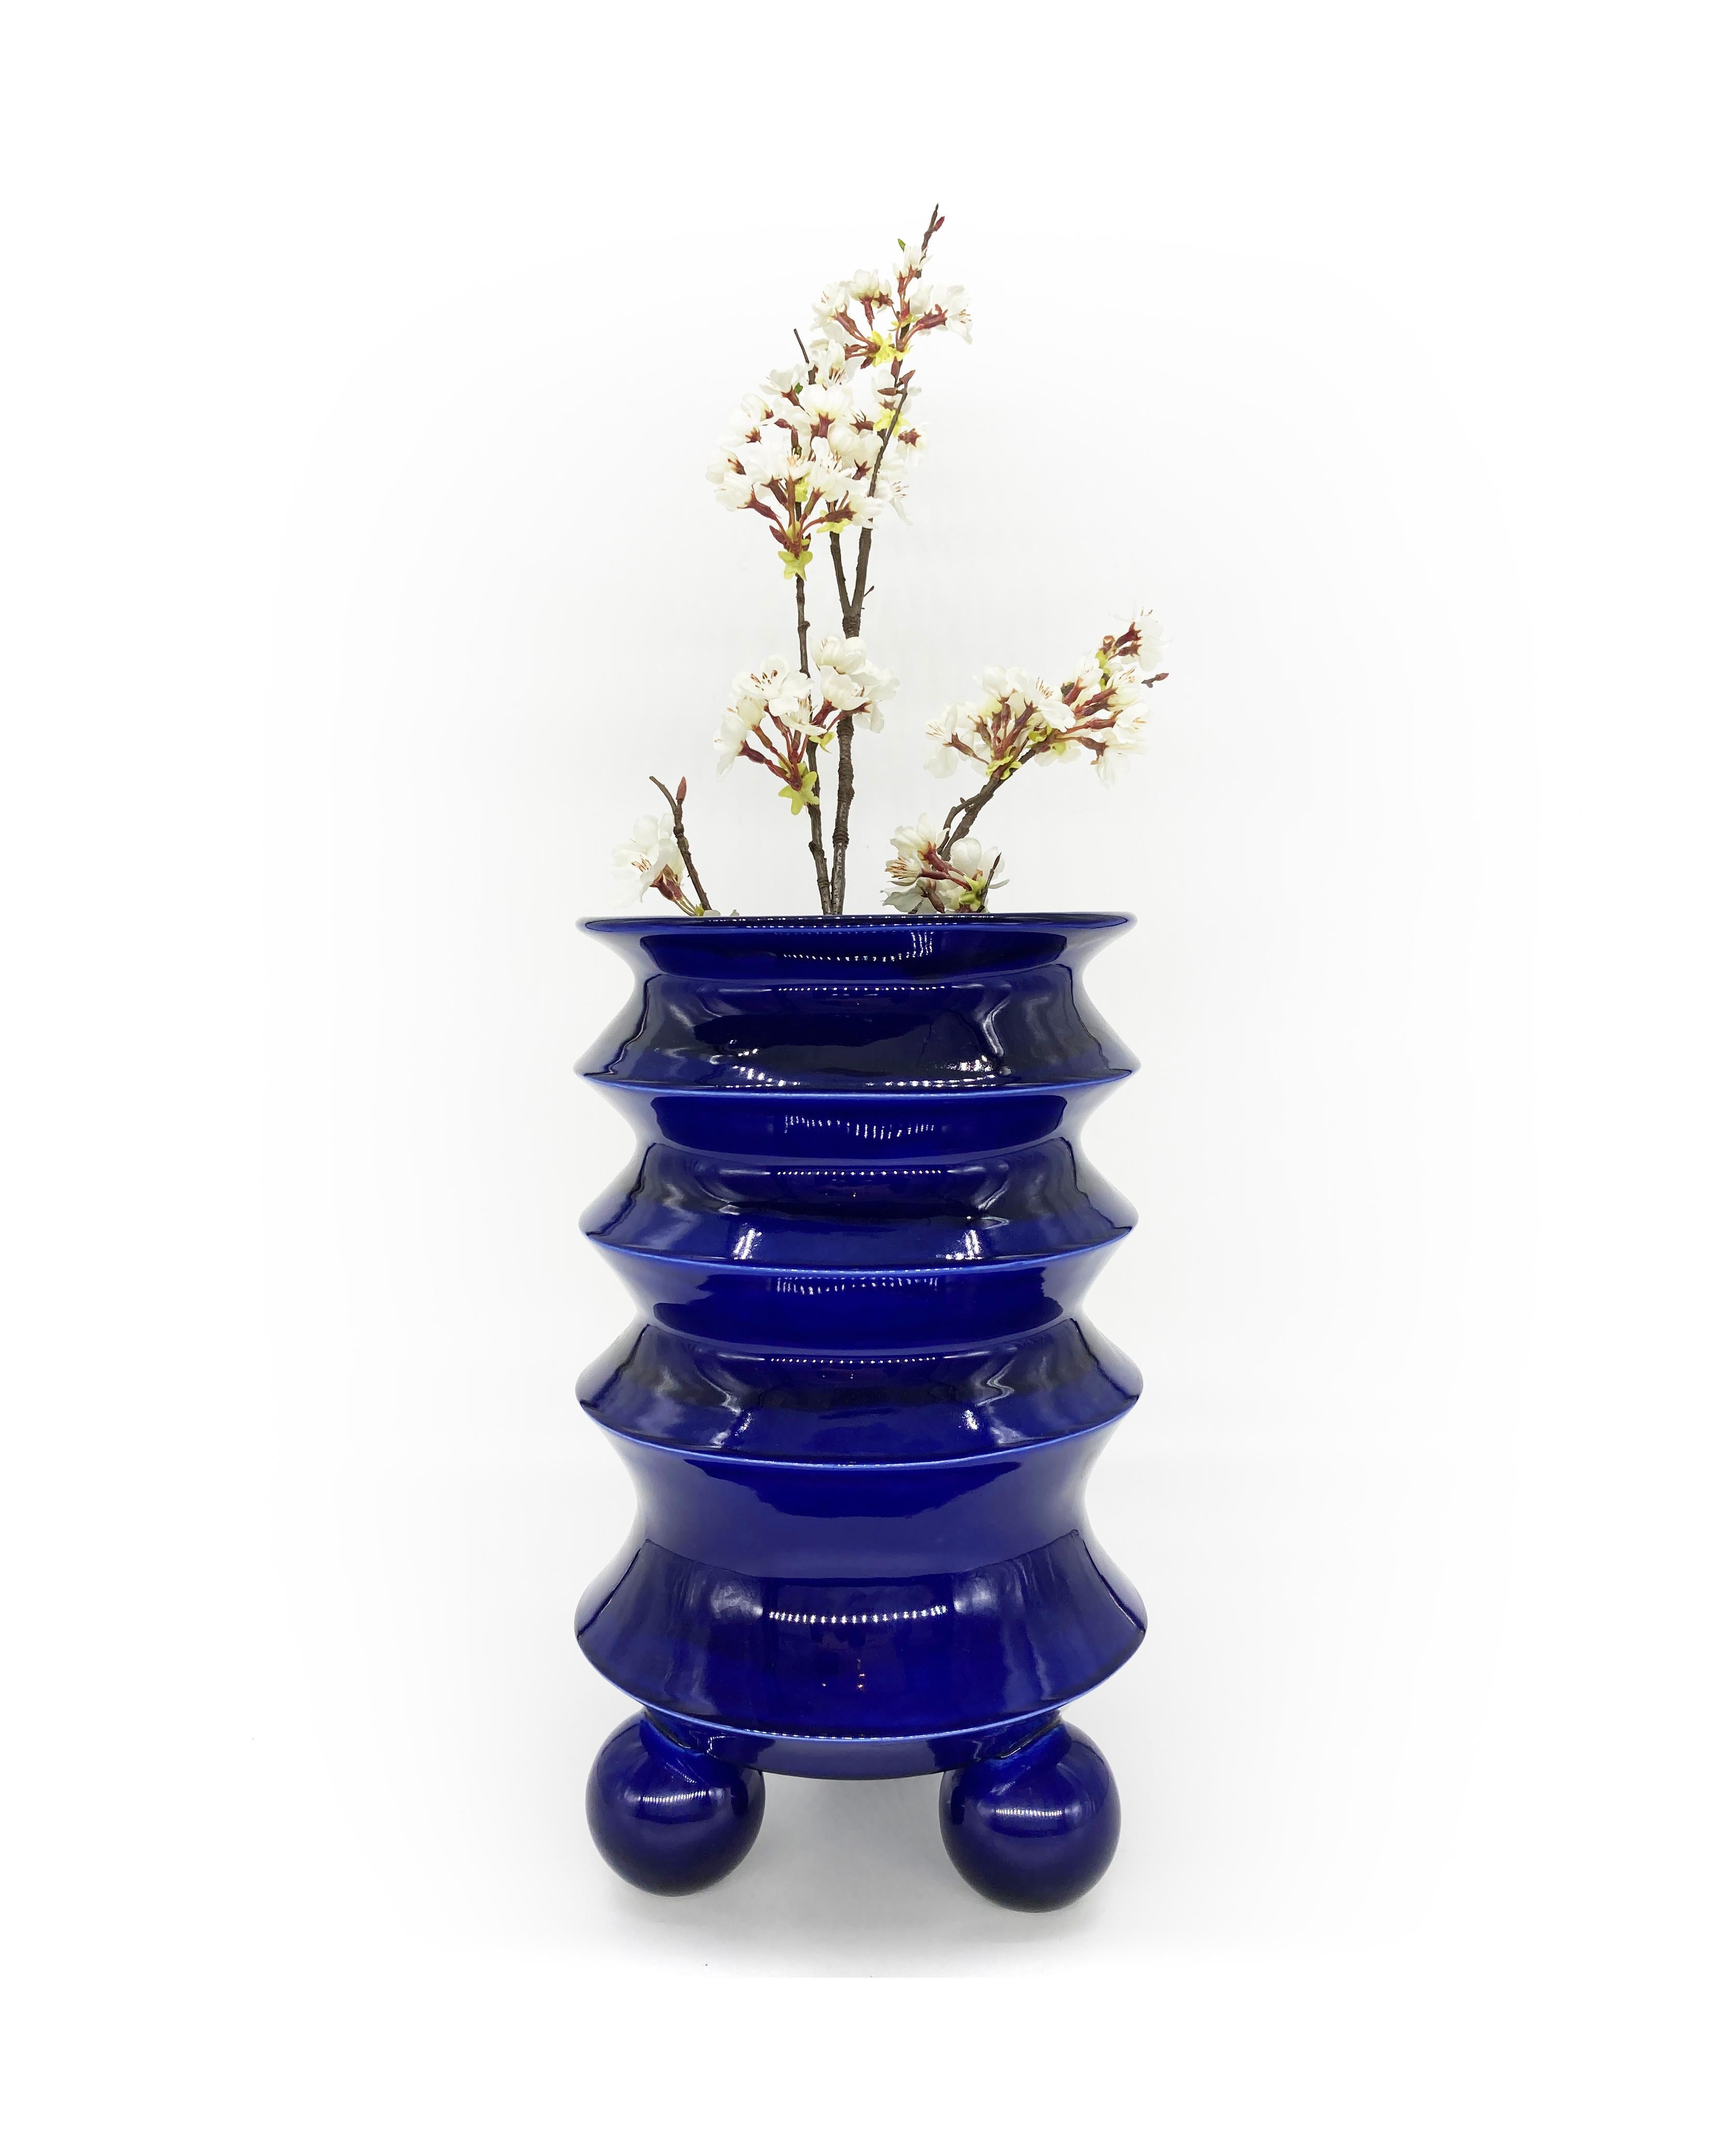 Post-Modern First Edition Toltec Pop Art Ceramic Vase in Blue, in Stock For Sale